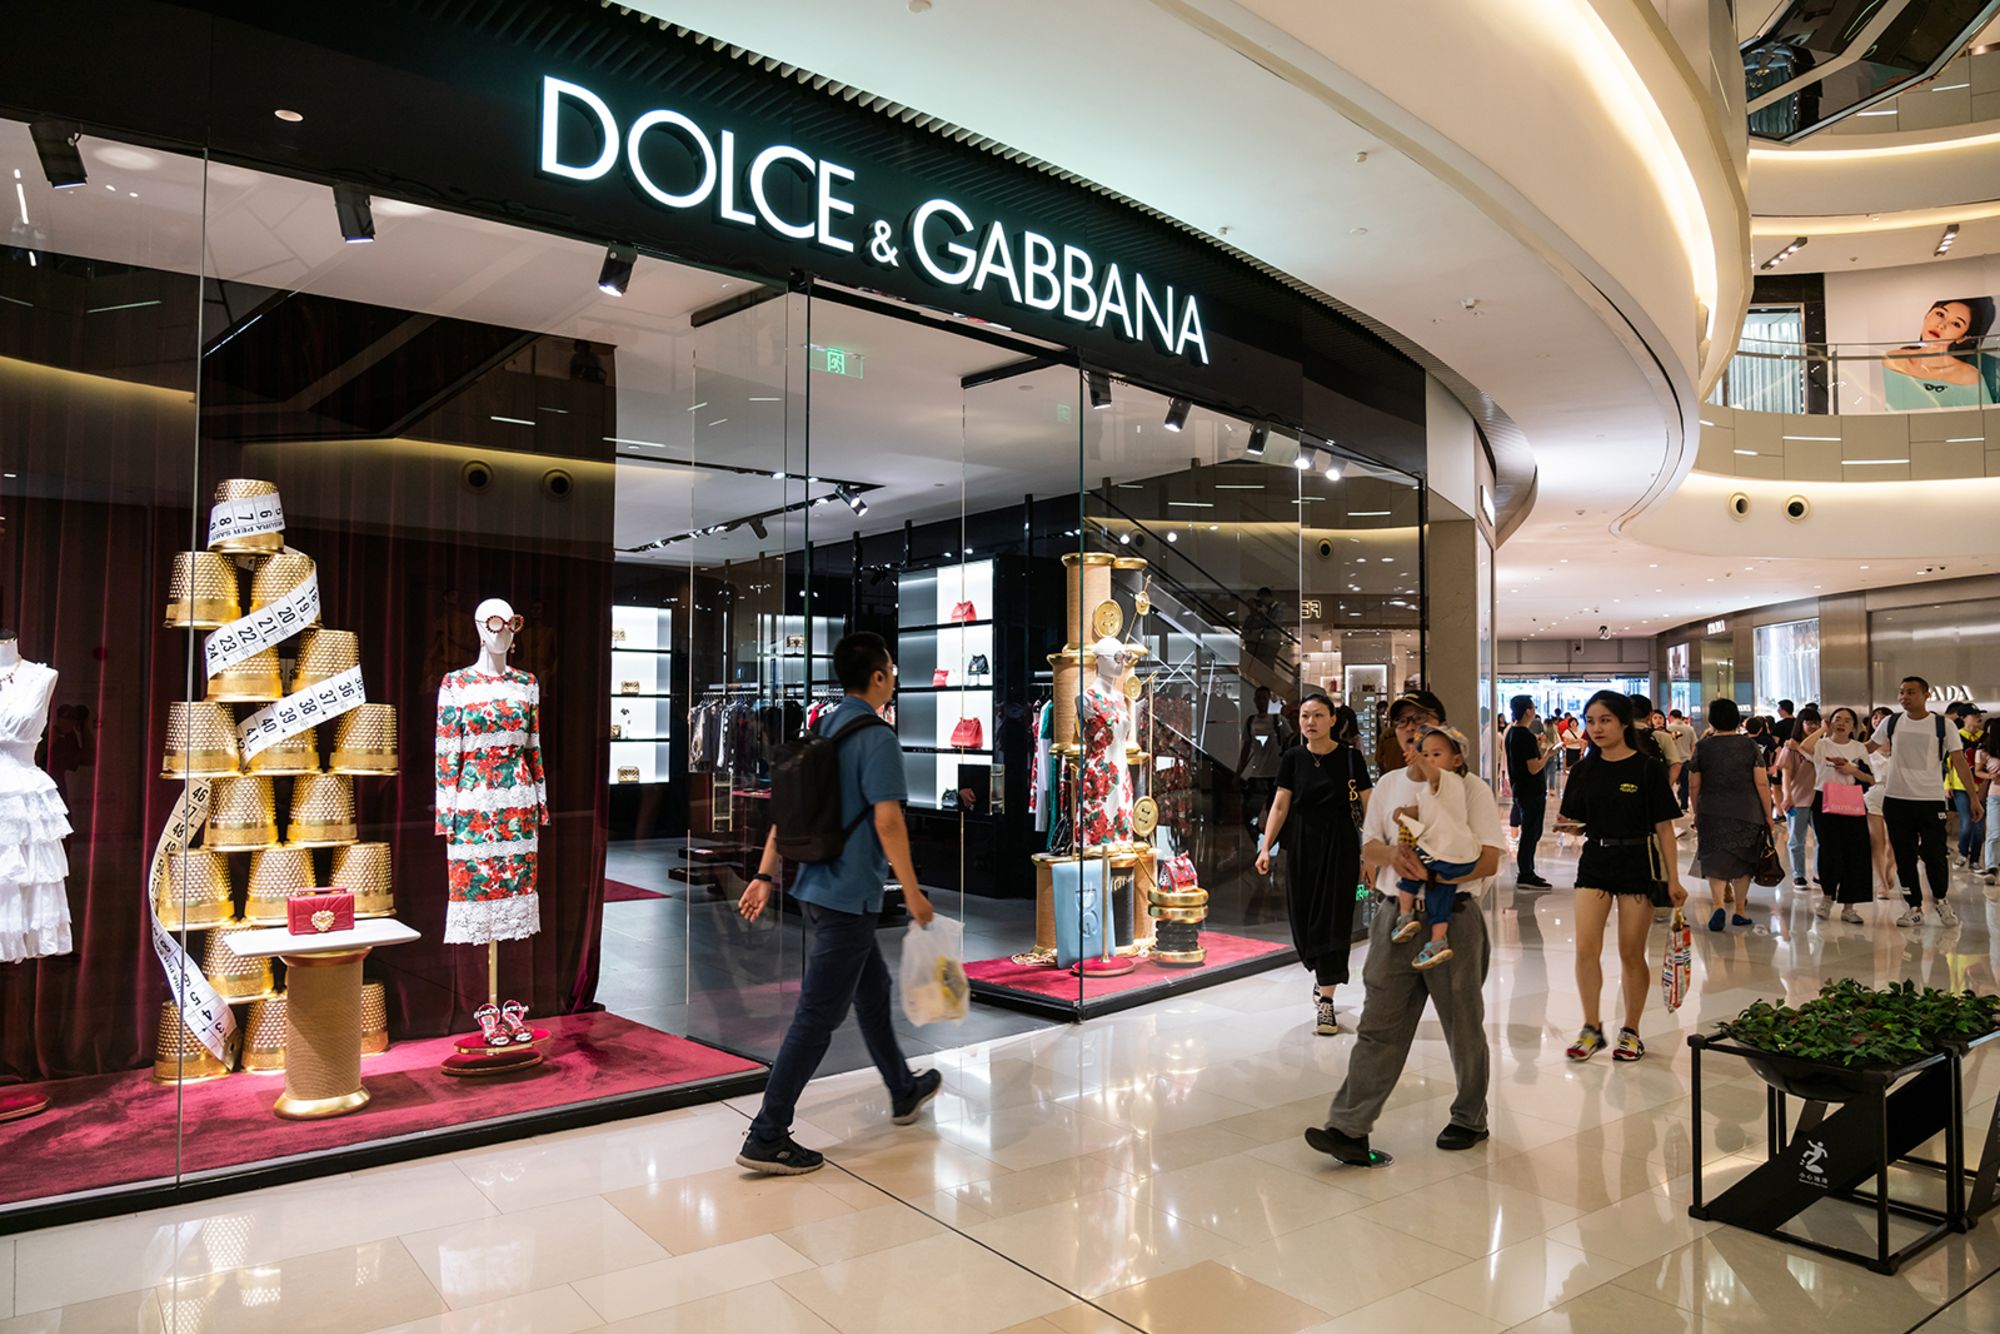 Three years after ad controversy, D&G is still struggling to win